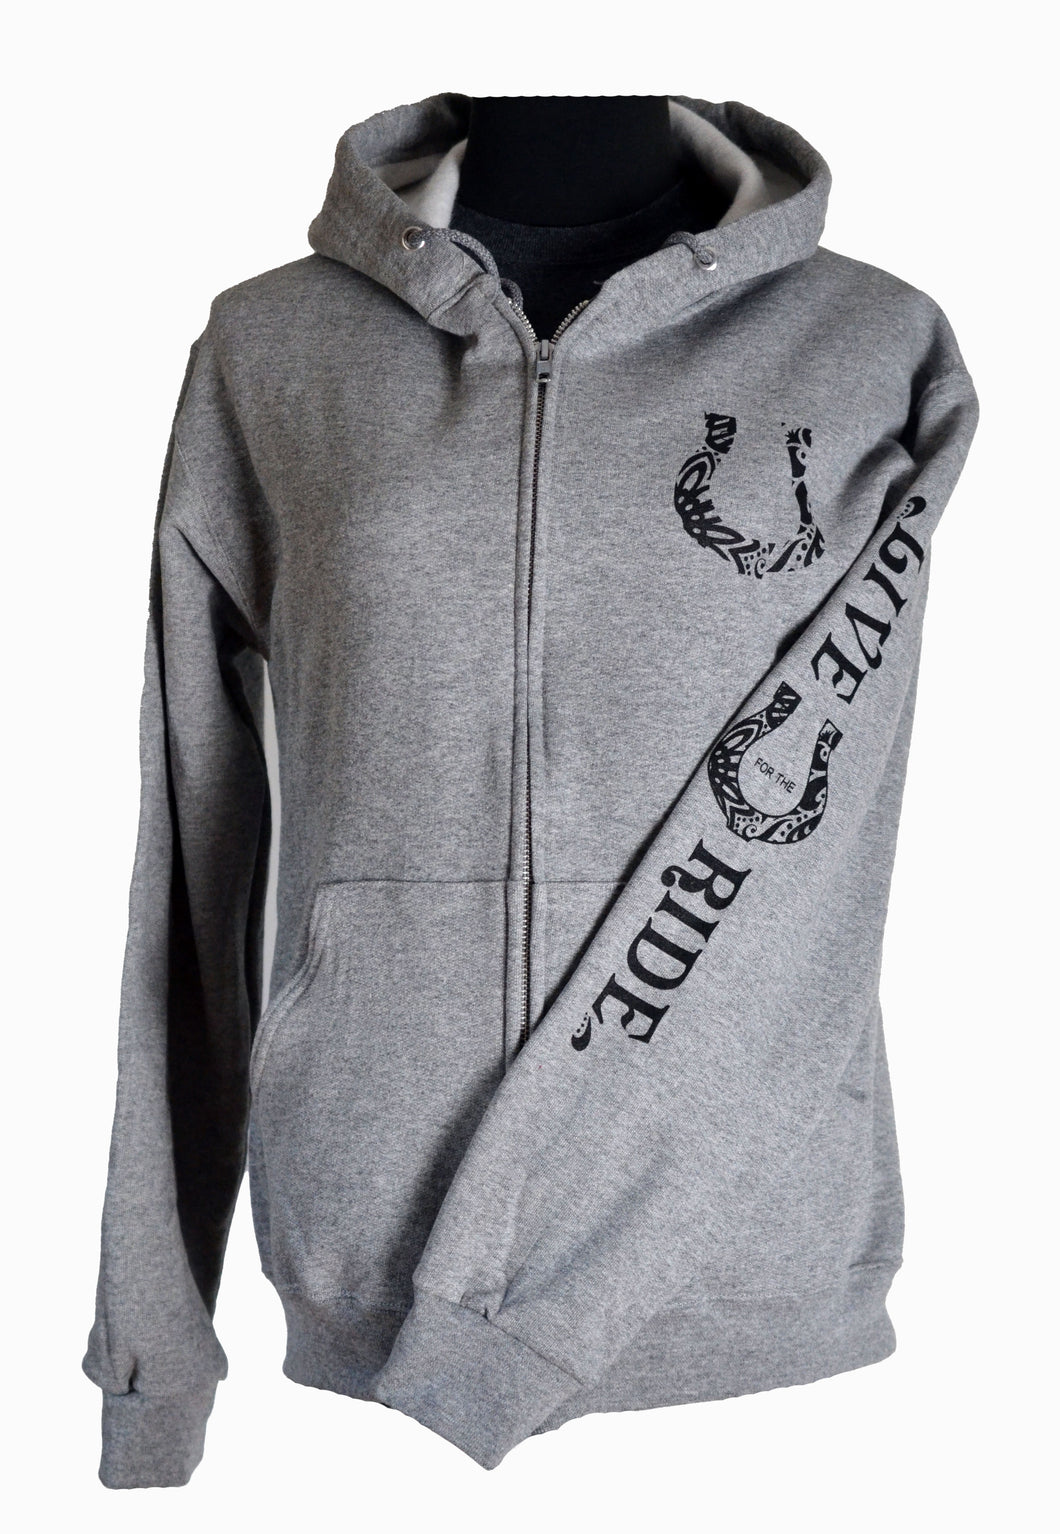 BOHO Horse Zip Hoodie – Live for the Ride